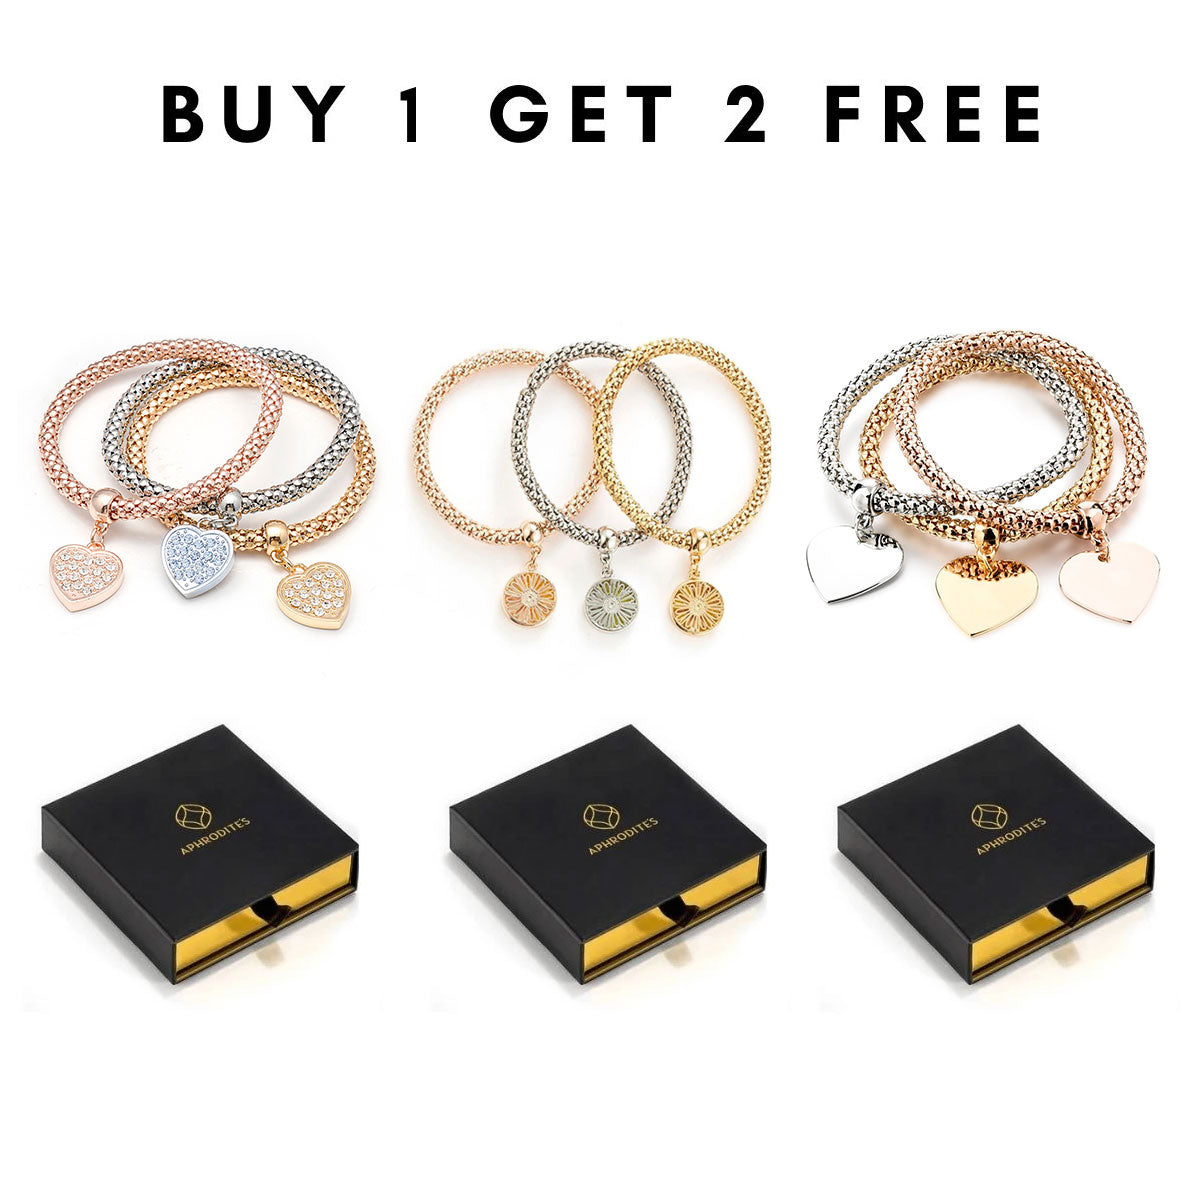 BUY 1 GET 2 FREE Glam Trio of Purity